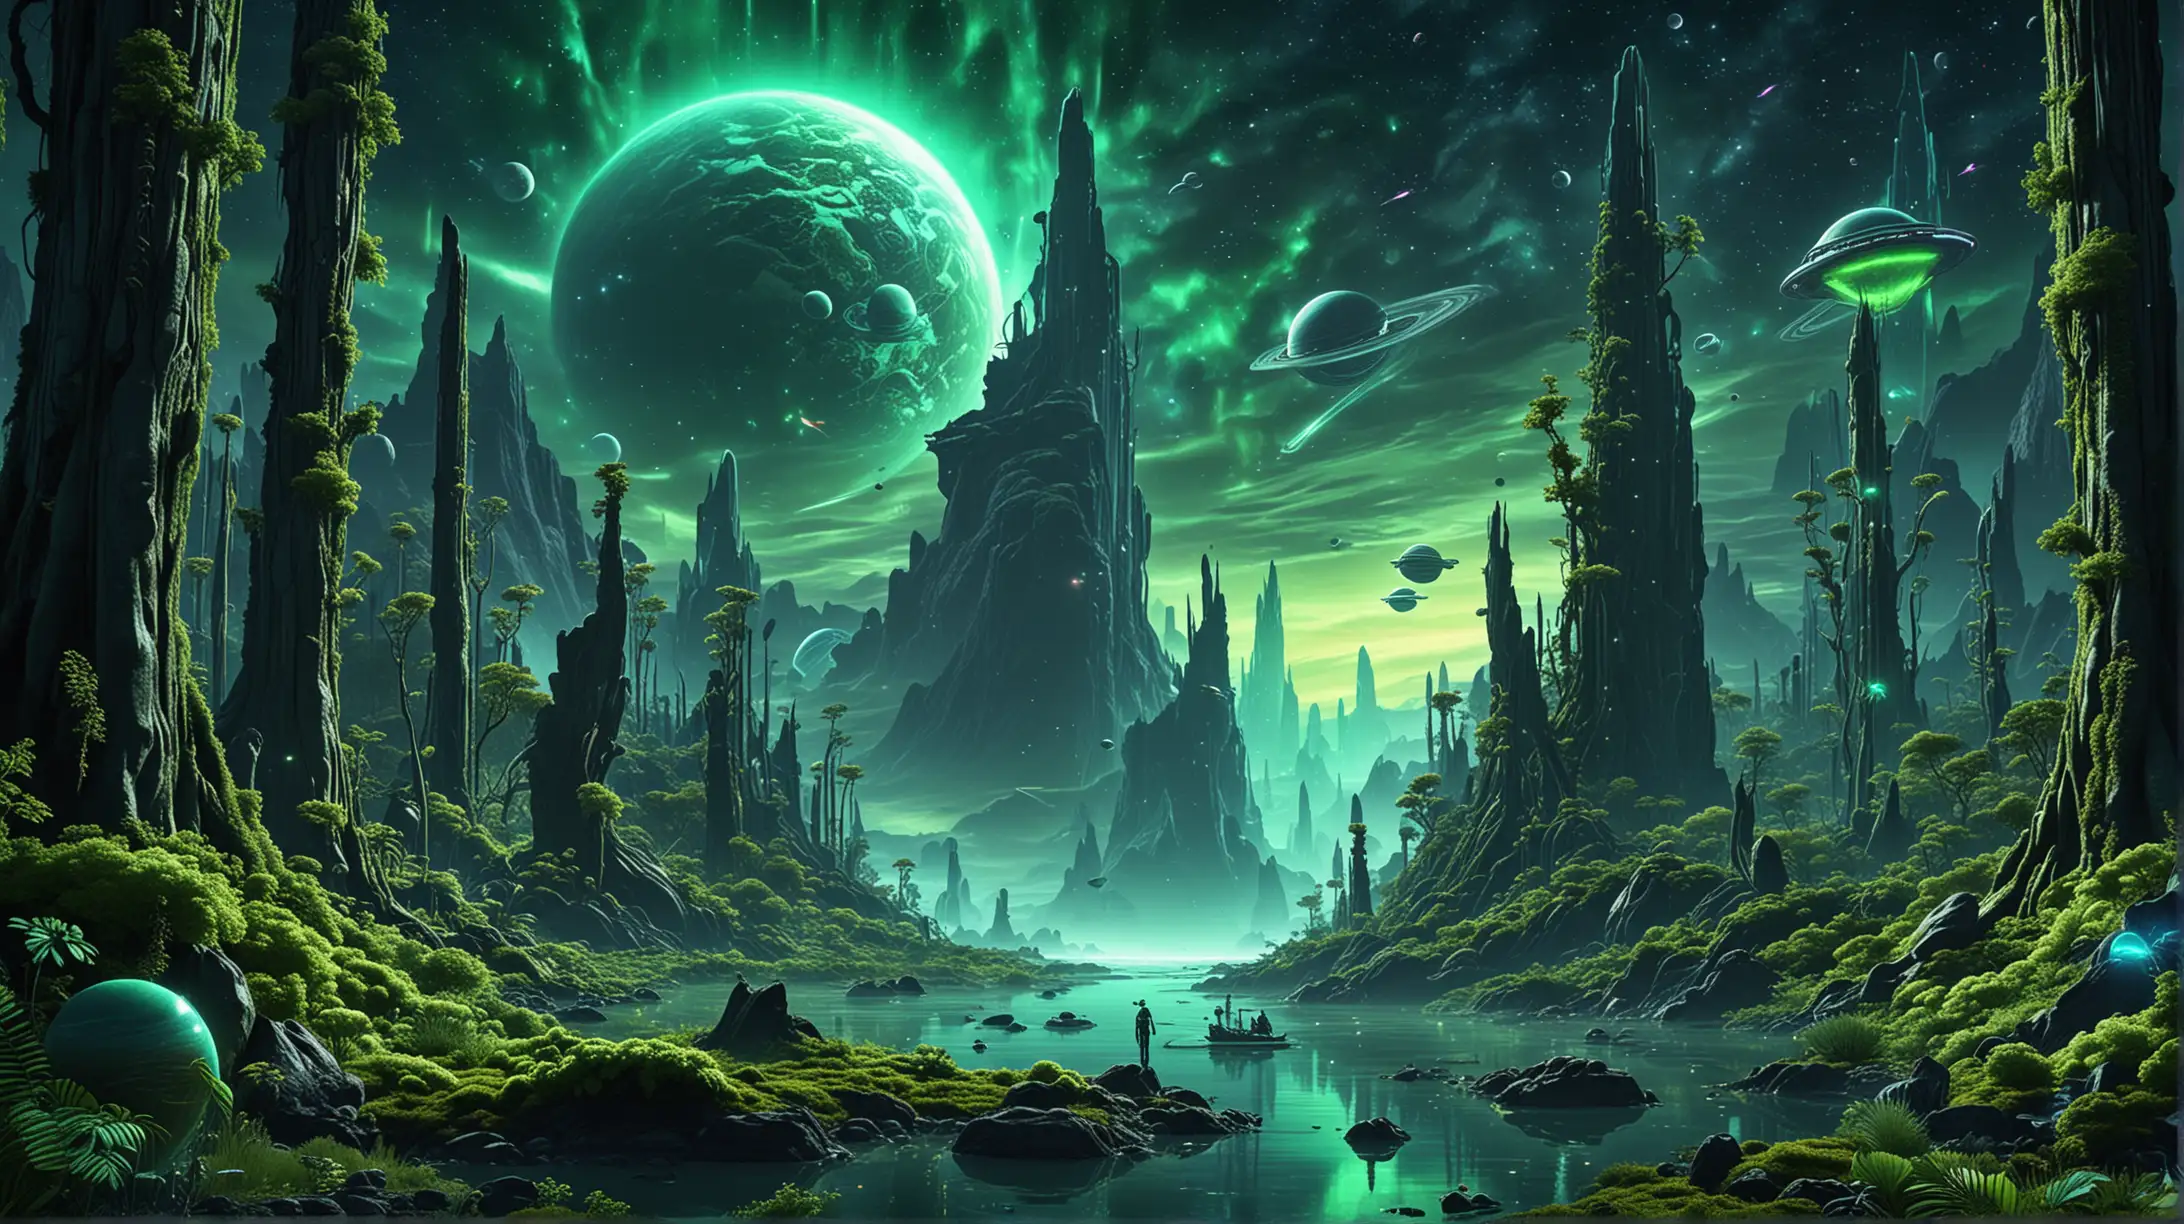  /imagine prompt: Green bioluminescent alien planet landscape, towering alien trees, colossal mountains, vibrant exotic flora, lush vegetation, diverse explorers in neo-futuristic suits, two giant aliens in green space suits, advanced botanical specimens, bio-luminous alien wildlife, mysterious atmosphere, futuristic technology, immersive setting, neon green aurora borealis, galactic sky with stars and planets, alien spaceships, intricate details, surreal ambiance, vibrant green colors, high-resolution digital art, dynamic lighting, realistic textures, only vibrant neon green palette.::3 --aspect 2:1 